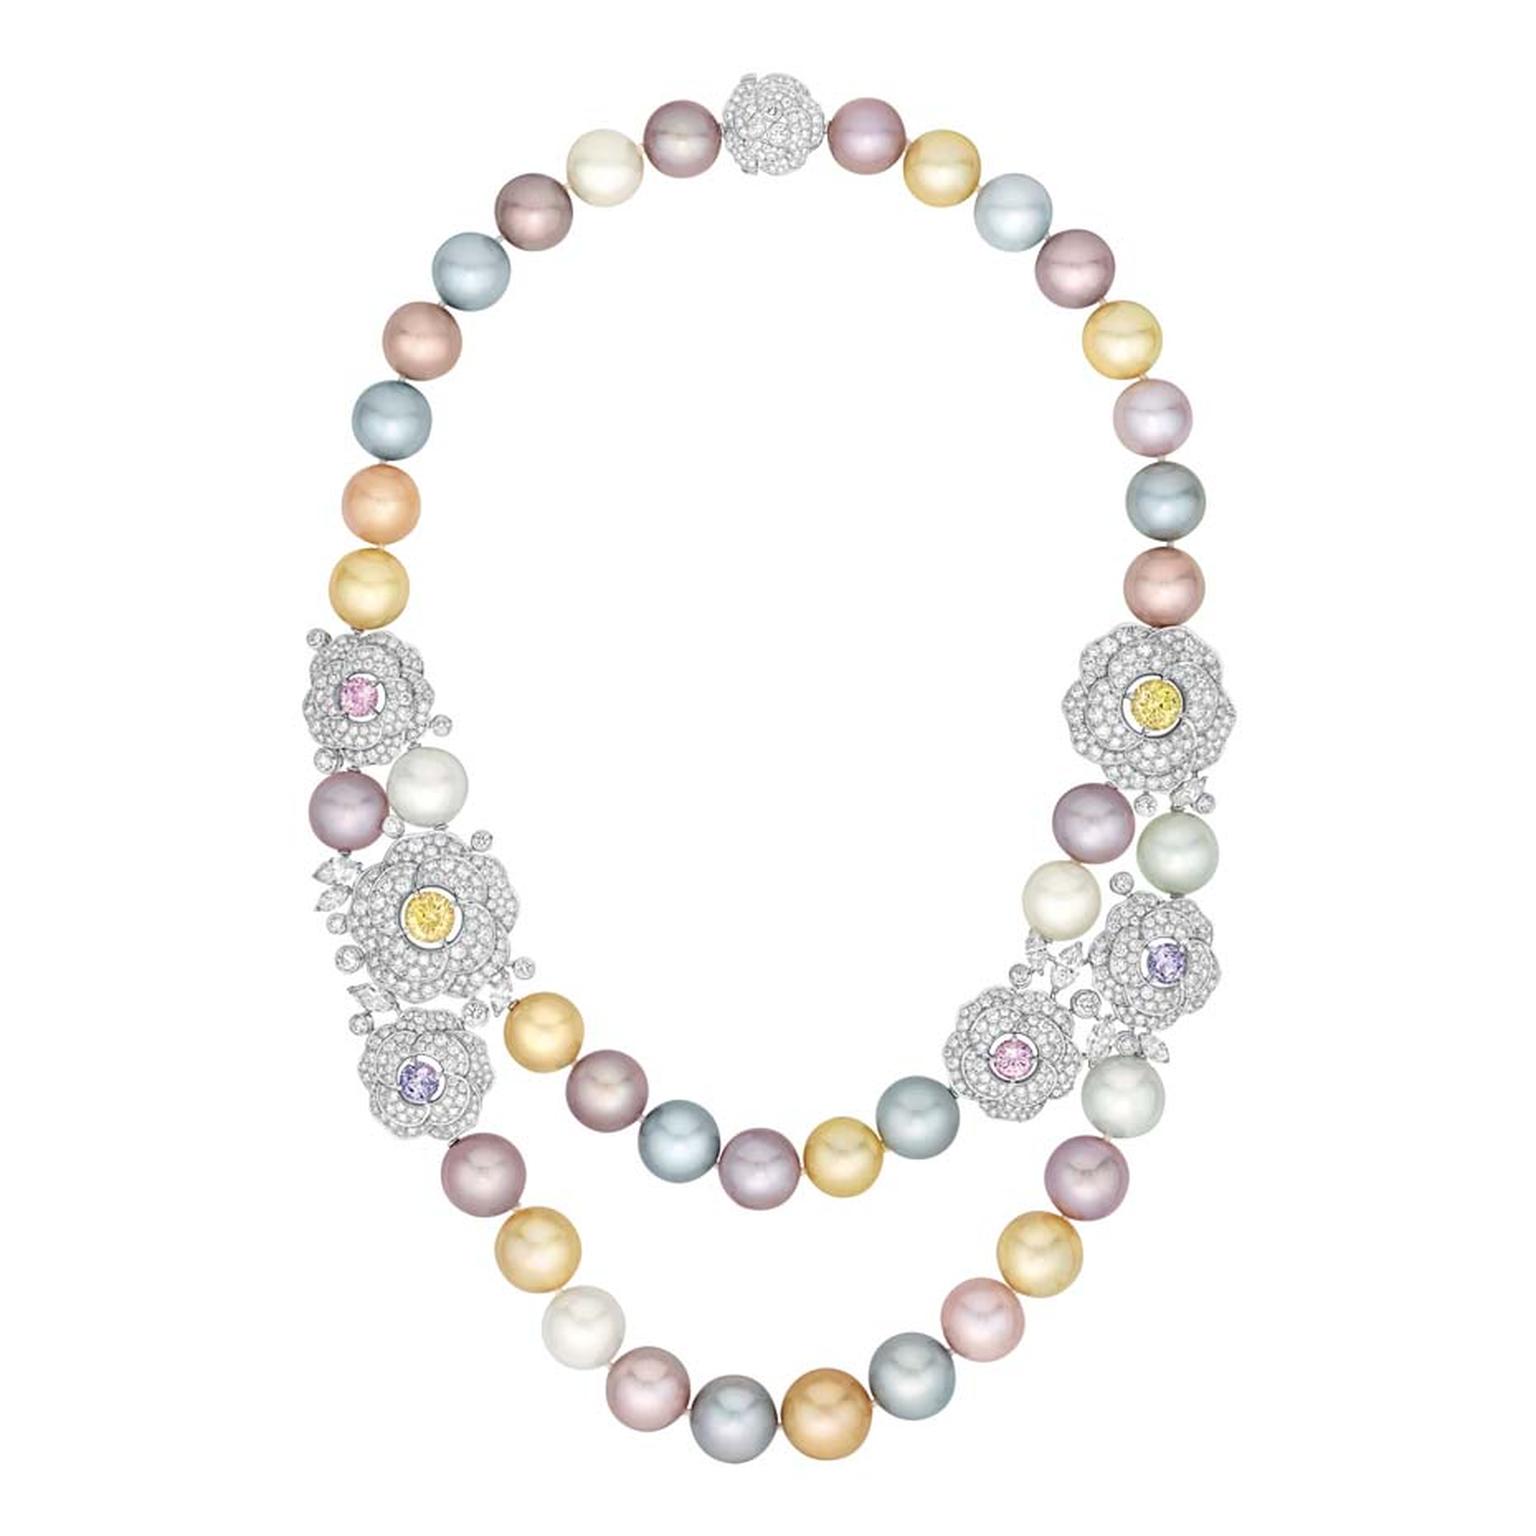 Chanel Printemps de Camélia Sautoir in white gold with 38 Tahitian, South Sea and freshwater cultured pearls